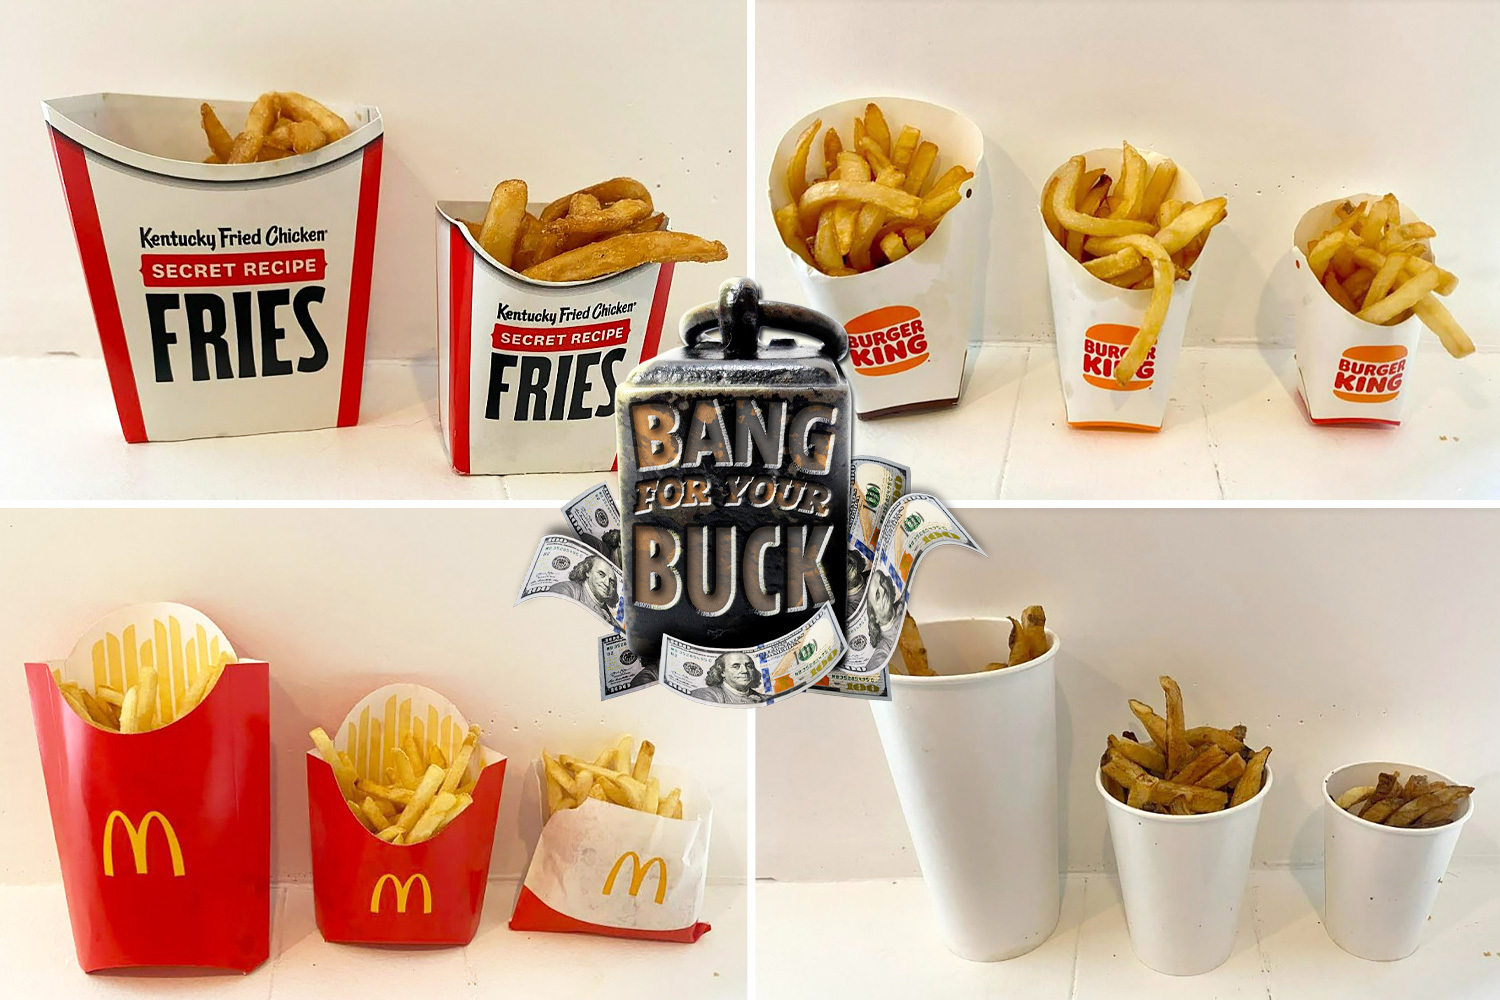 The fast-food chains giving the most fries for your cash and which underfill